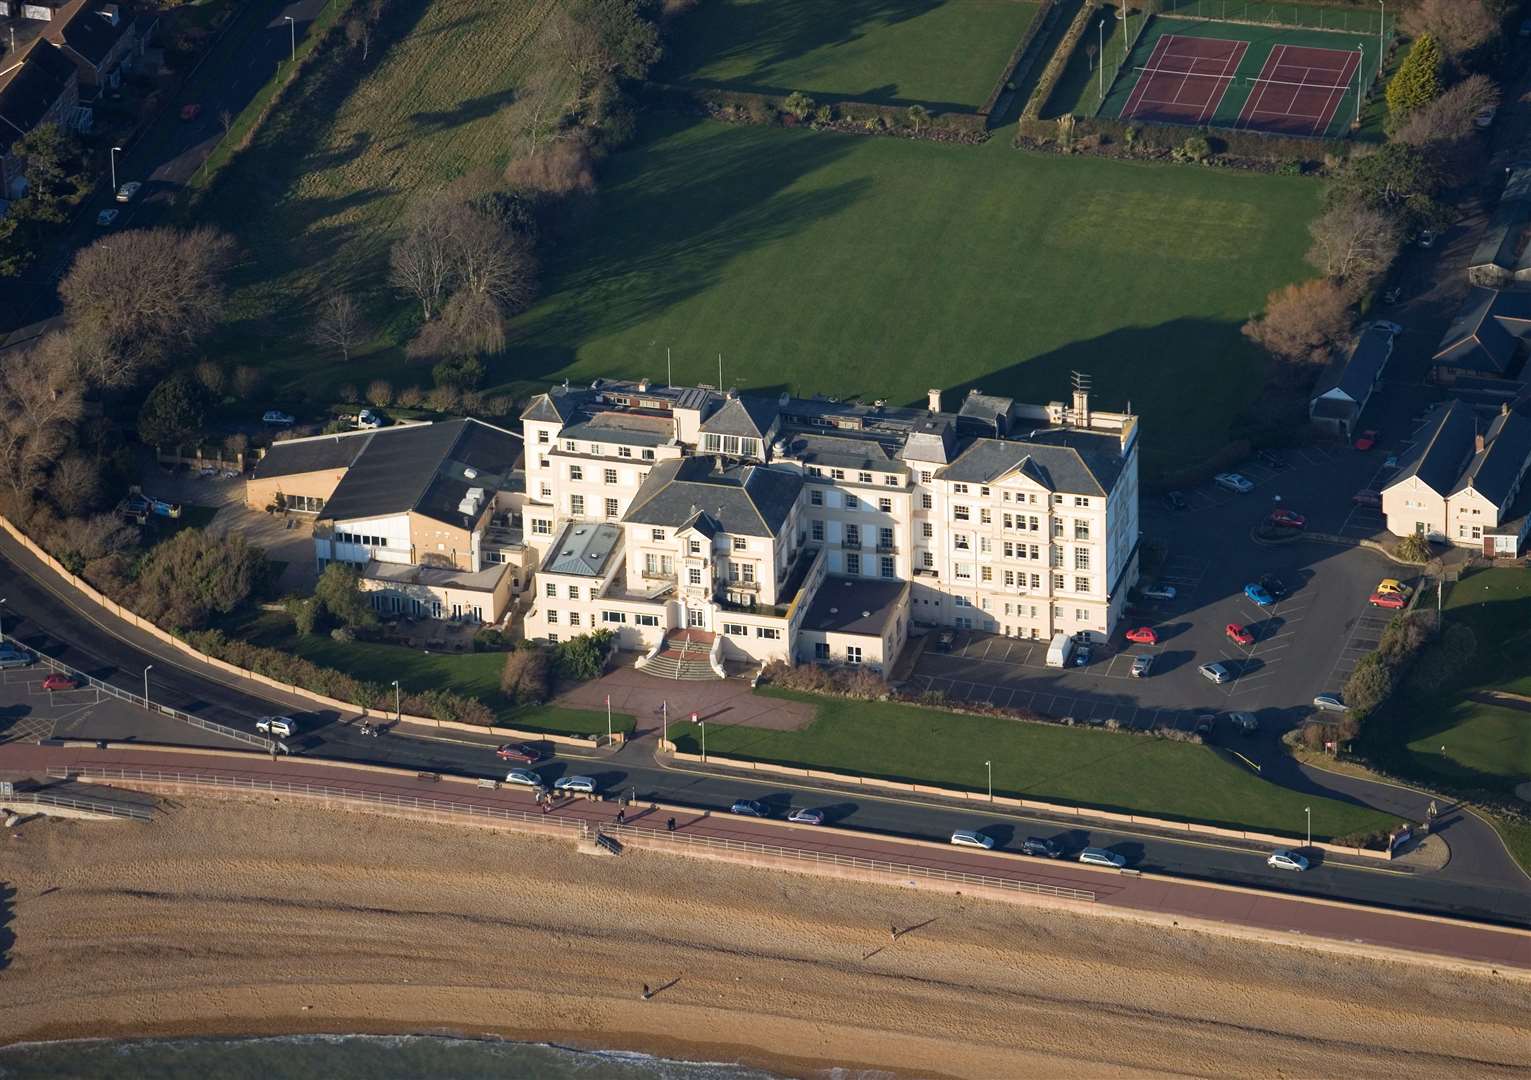 The GSE Group, which owns Hythe Imperial Hotel, says it wants to create 'an innovative, sustainable scheme that provides a unique offering for visitors'